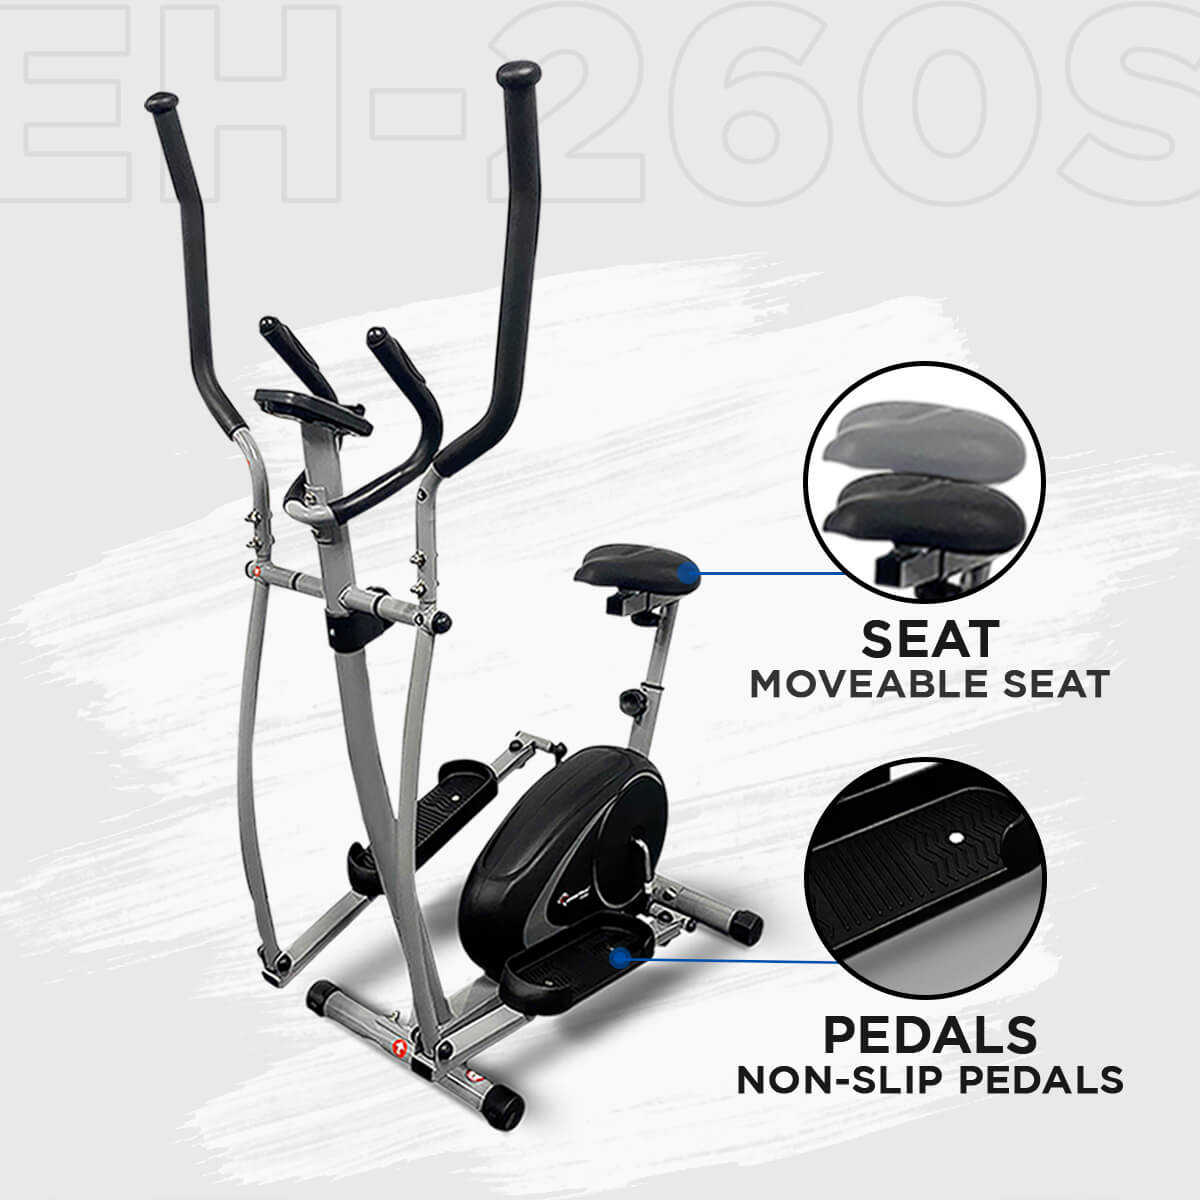 PowerMax Fitness New 2021 EH-260S Elliptical Cross Trainer with Hand Pulse